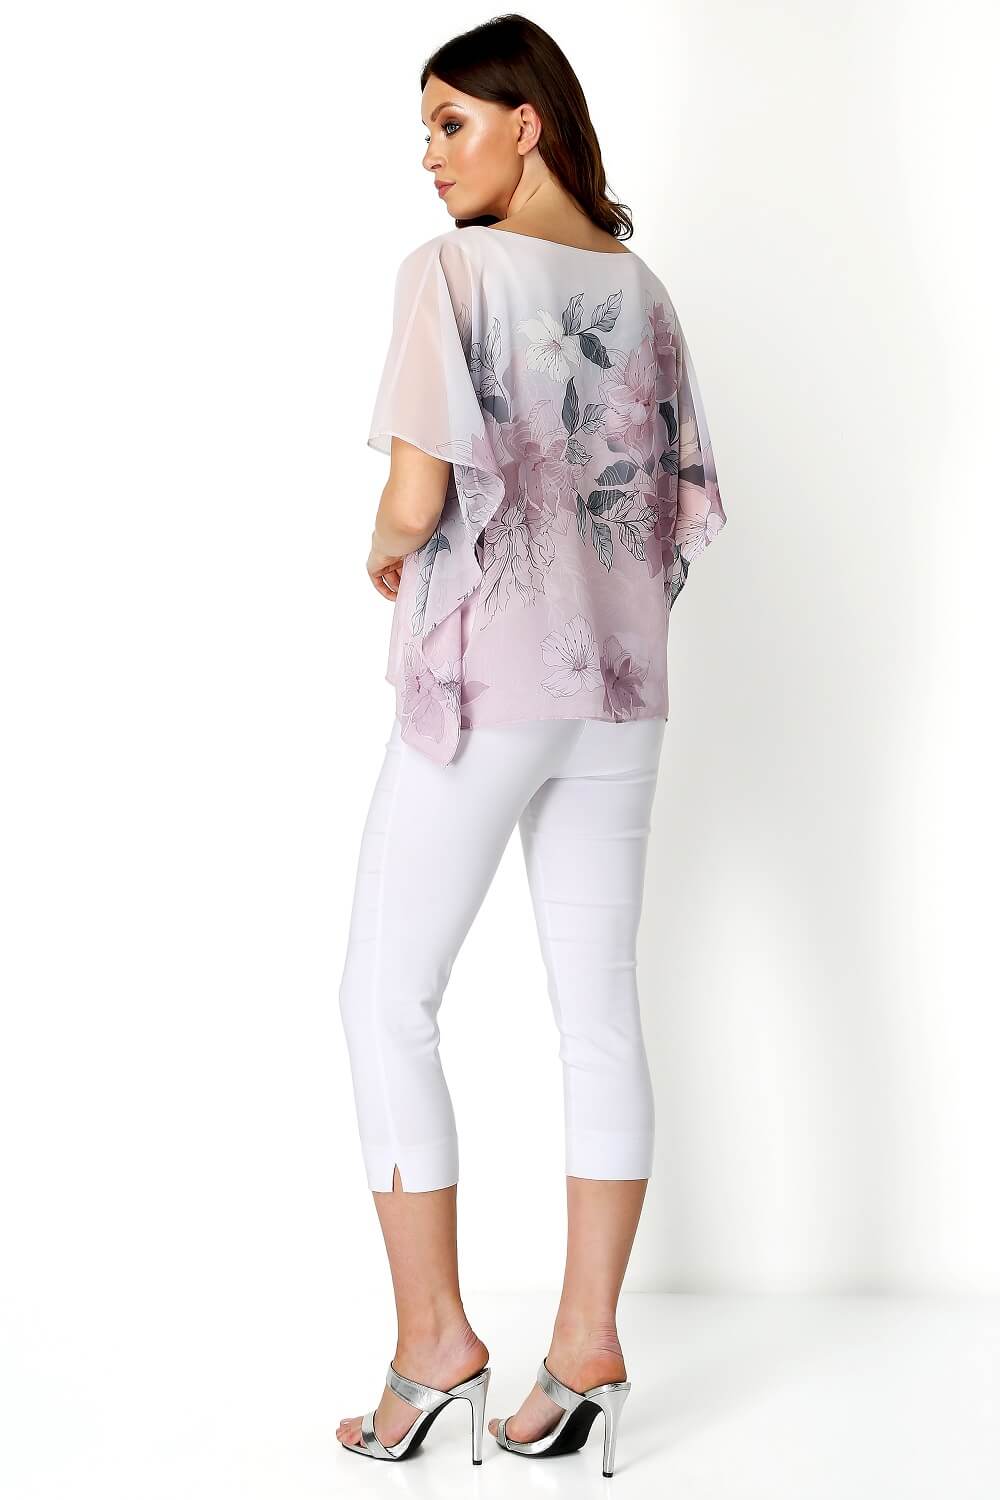 PINK Floral Chiffon Overlay Top, Image 3 of 8